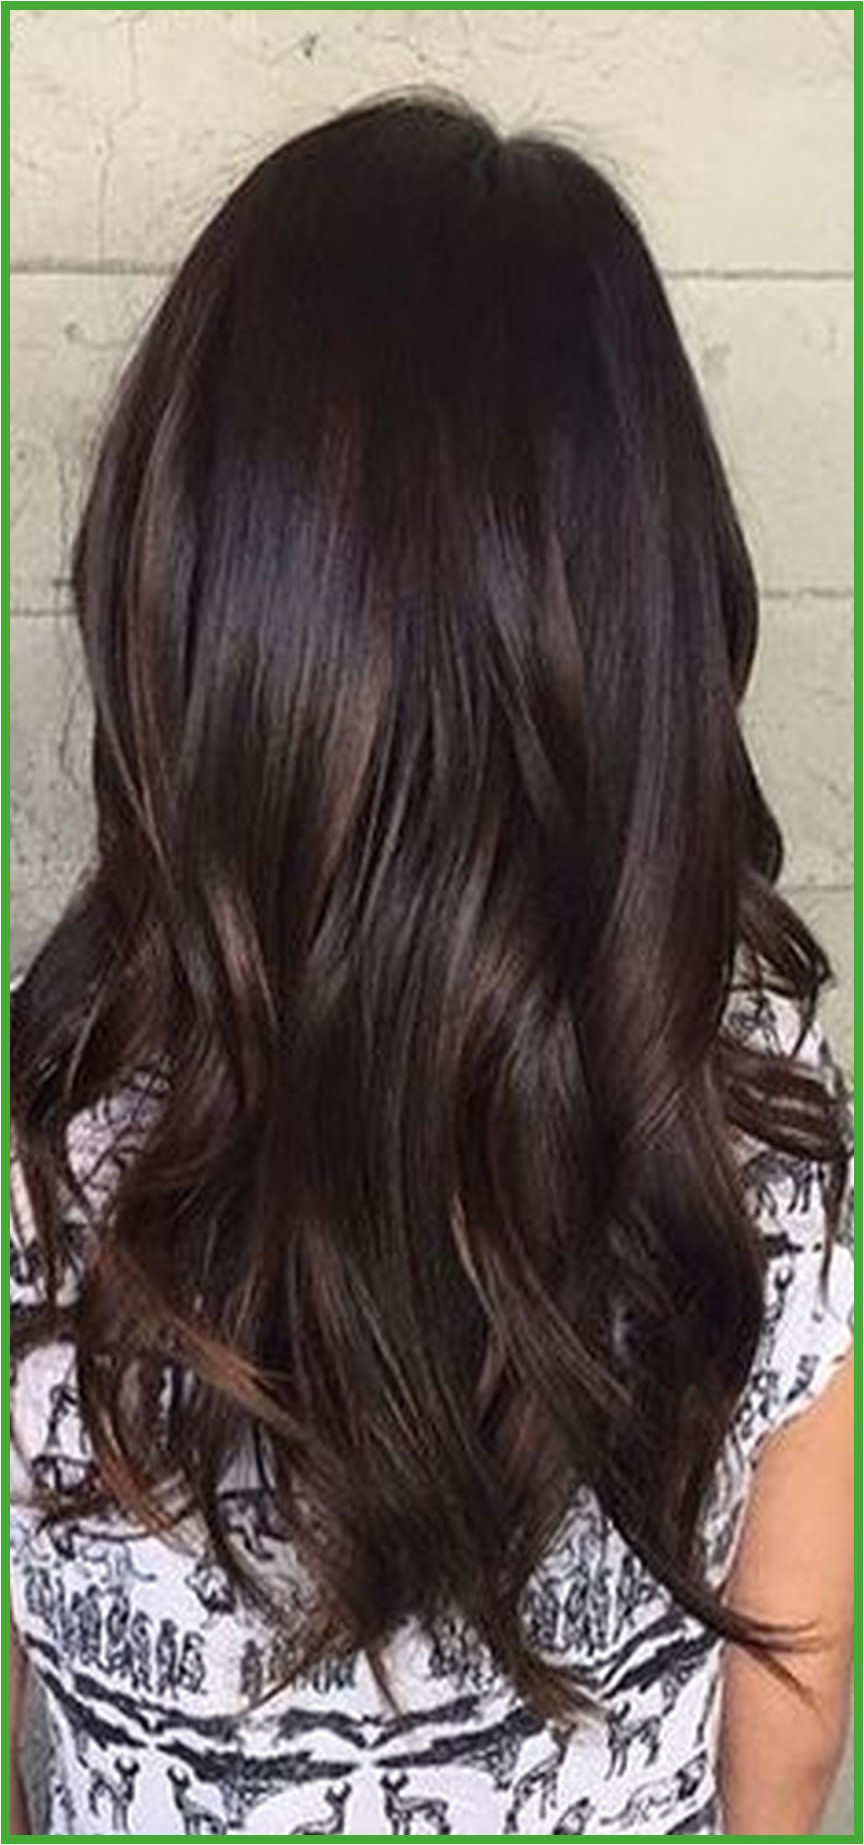 Asian Hair with Highlights Awesome Long Hair Hairstyles Hair Dye Styles Beautiful I Pinimg 1200x 0d